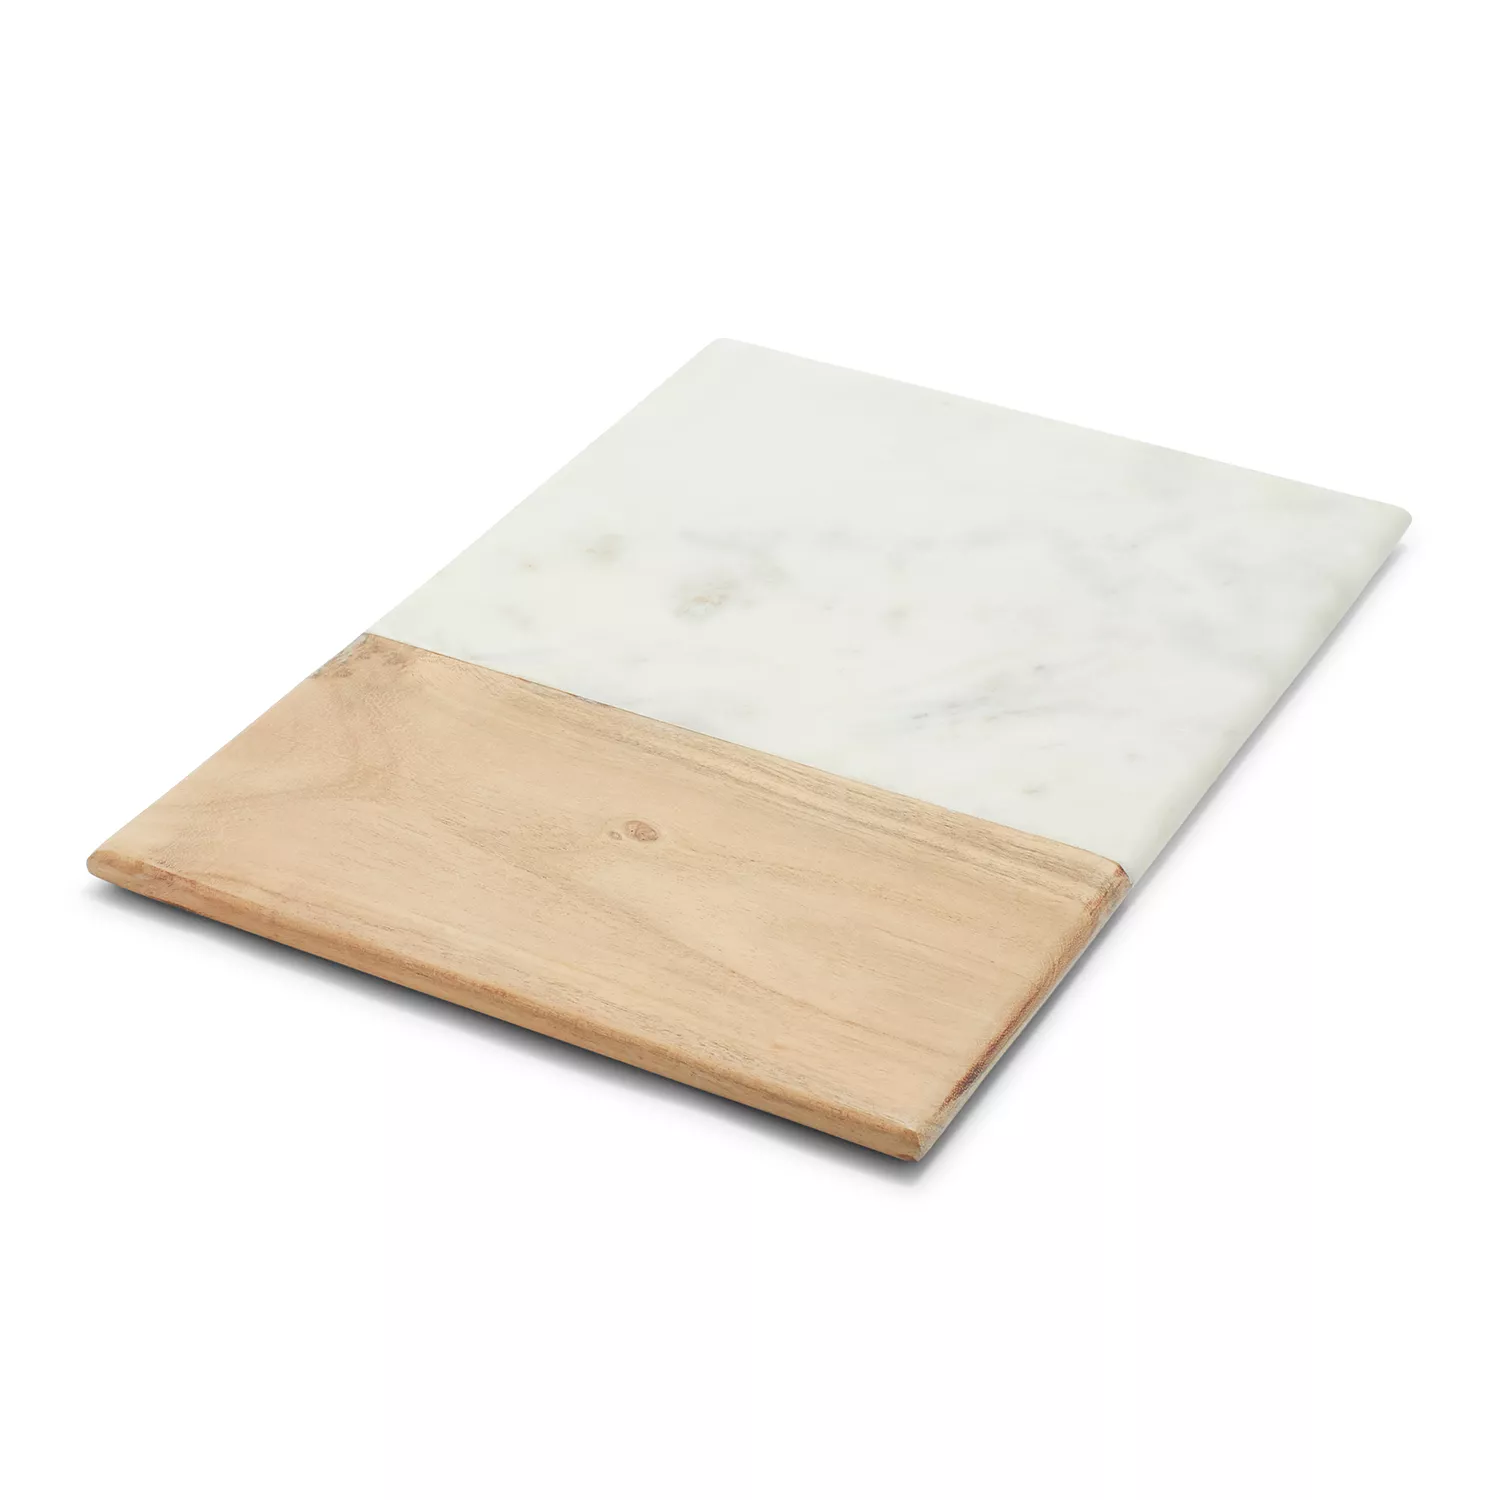 Sur La Table Rectangular Marble and Acacia Wood Serving Board